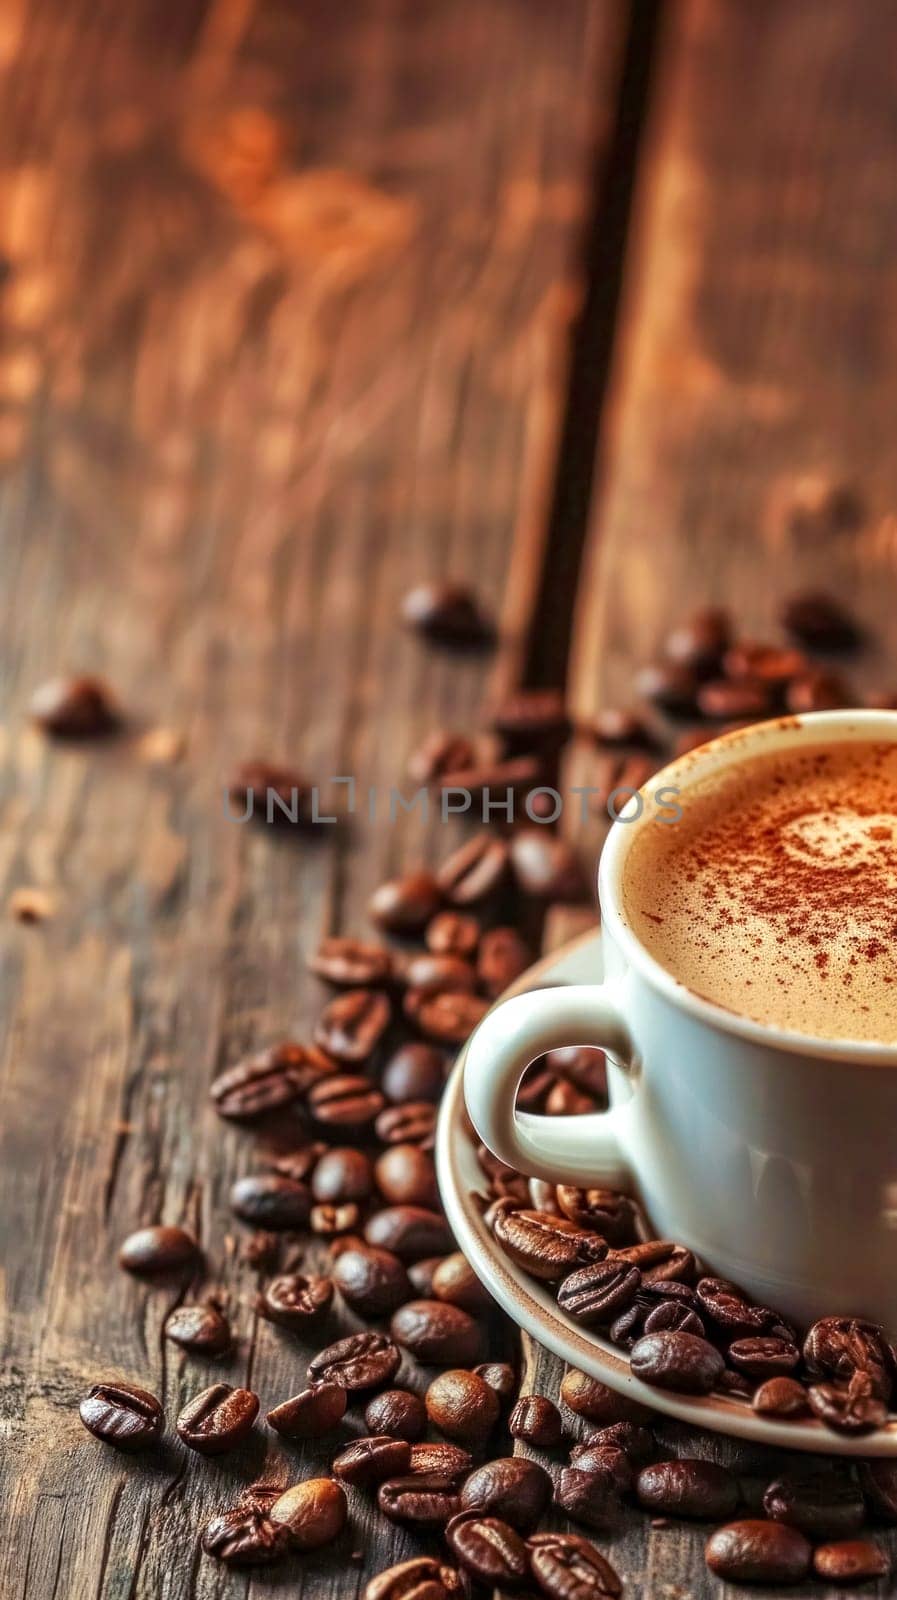 freshly brewed cup of coffee, creamy top, surrounded by a scatter of roasted coffee beans on a rustic wooden surface, conveying the rich aroma and comforting experience of enjoying a quality coffee by Edophoto